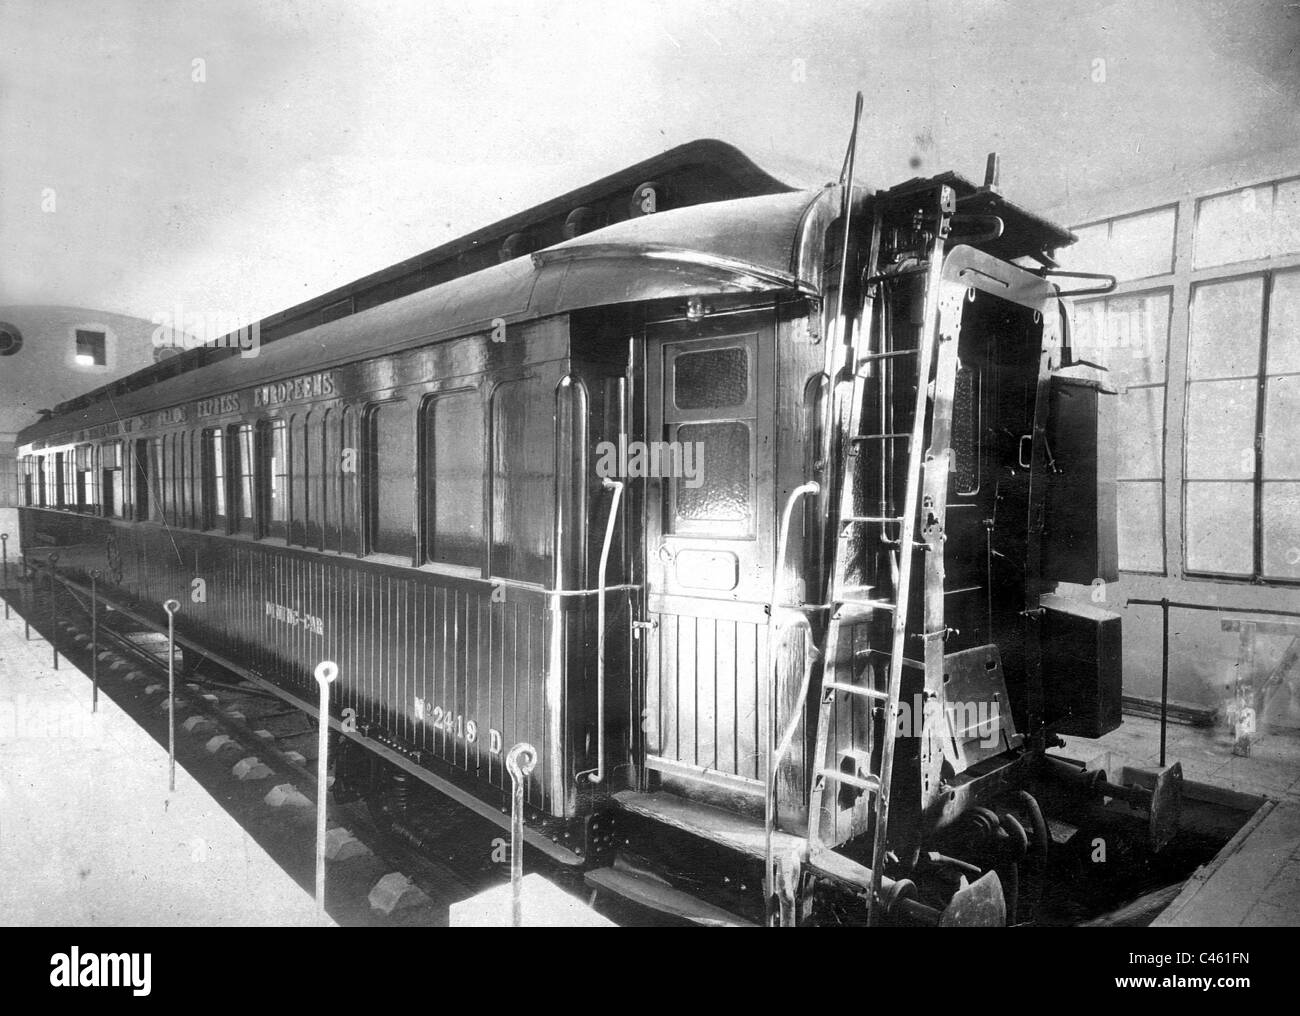 Railroad carriage of Compiegne Stock Photo